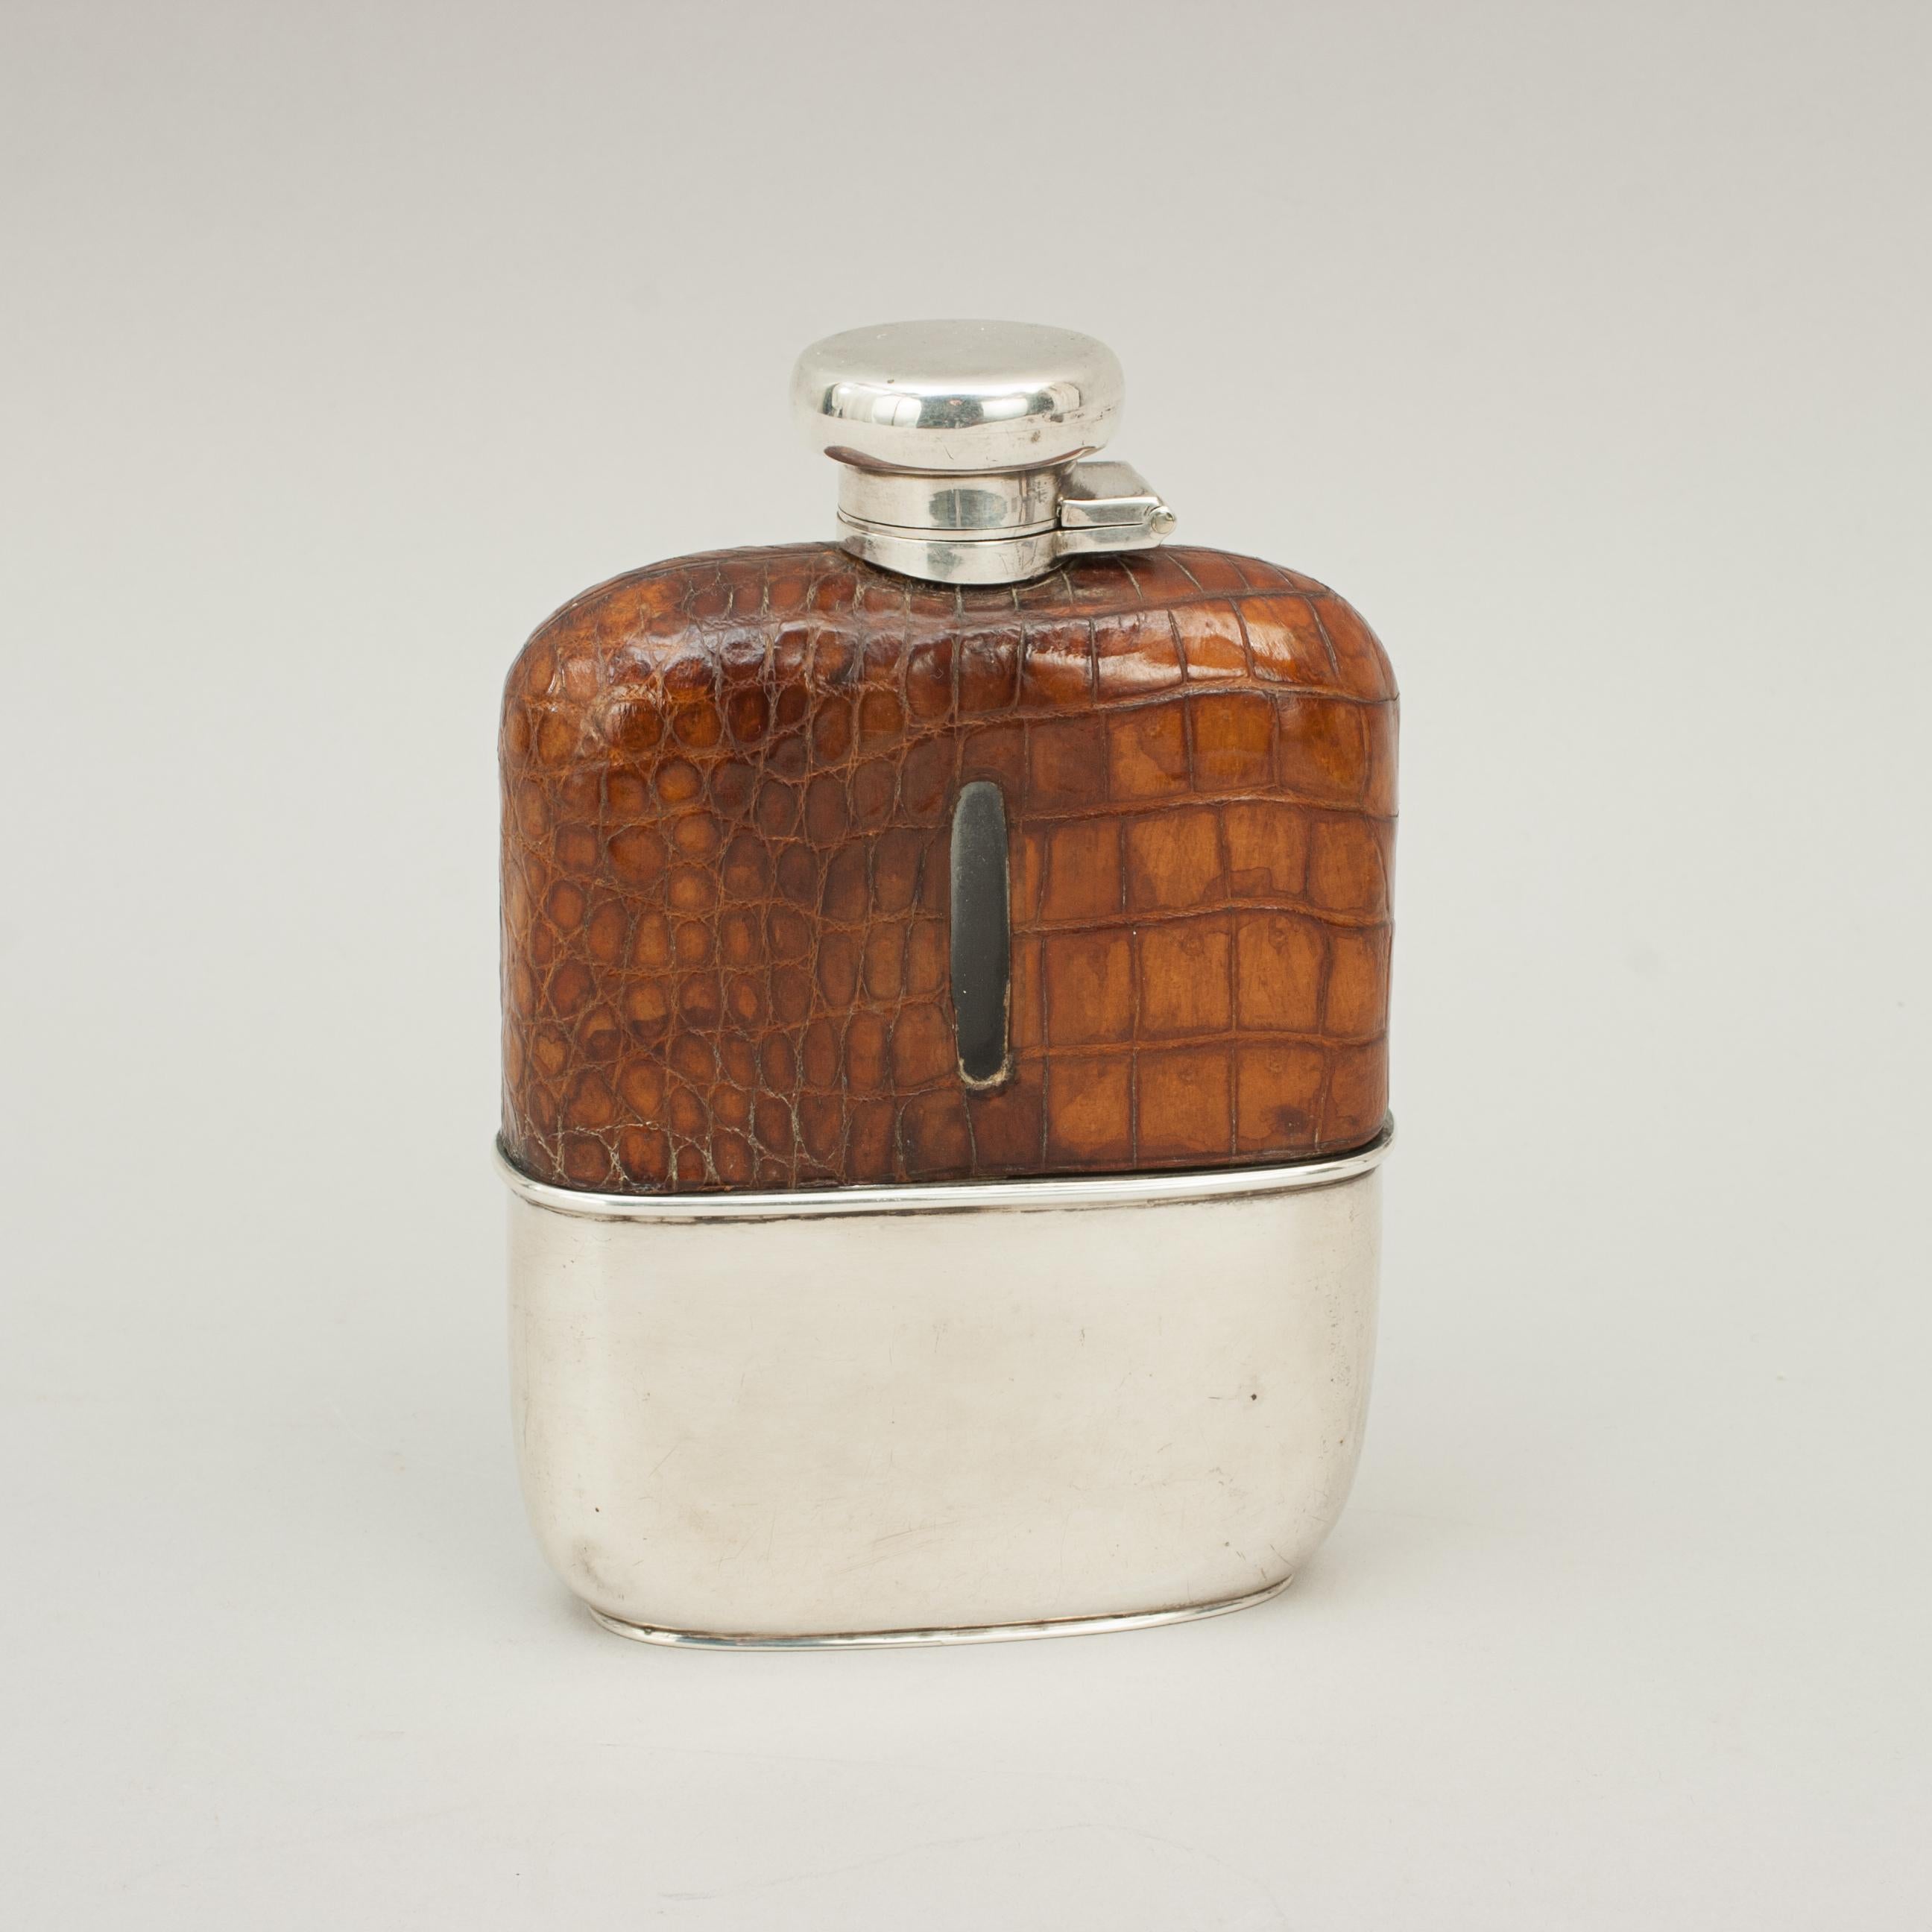 Vintage Silver Hip Flask with Leather Cover by Deakin & Francis, Birmingham 1926 1